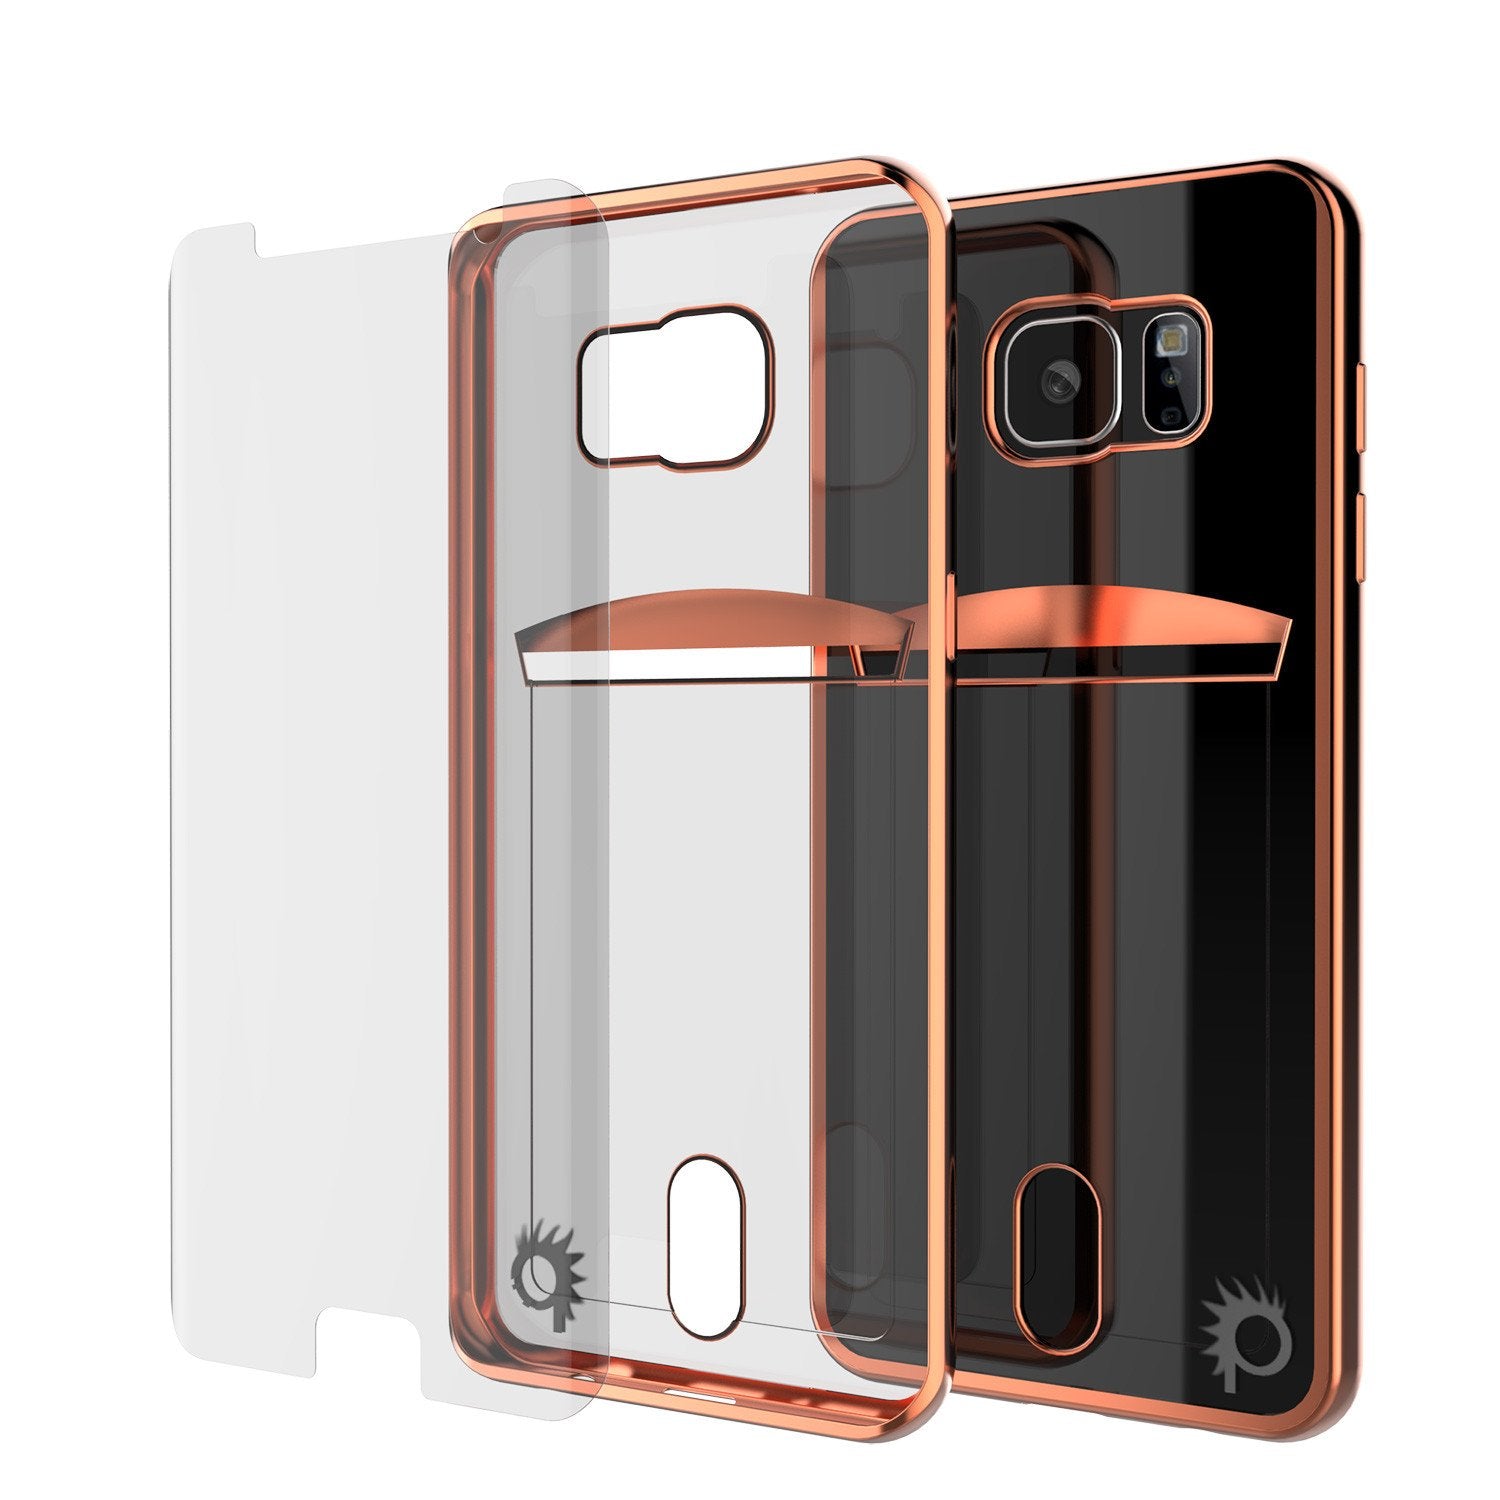 Galaxy S6 Case, PUNKCASE® LUCID Rose Gold Series | Card Slot | SHIELD Screen Protector | Ultra fit - PunkCase NZ